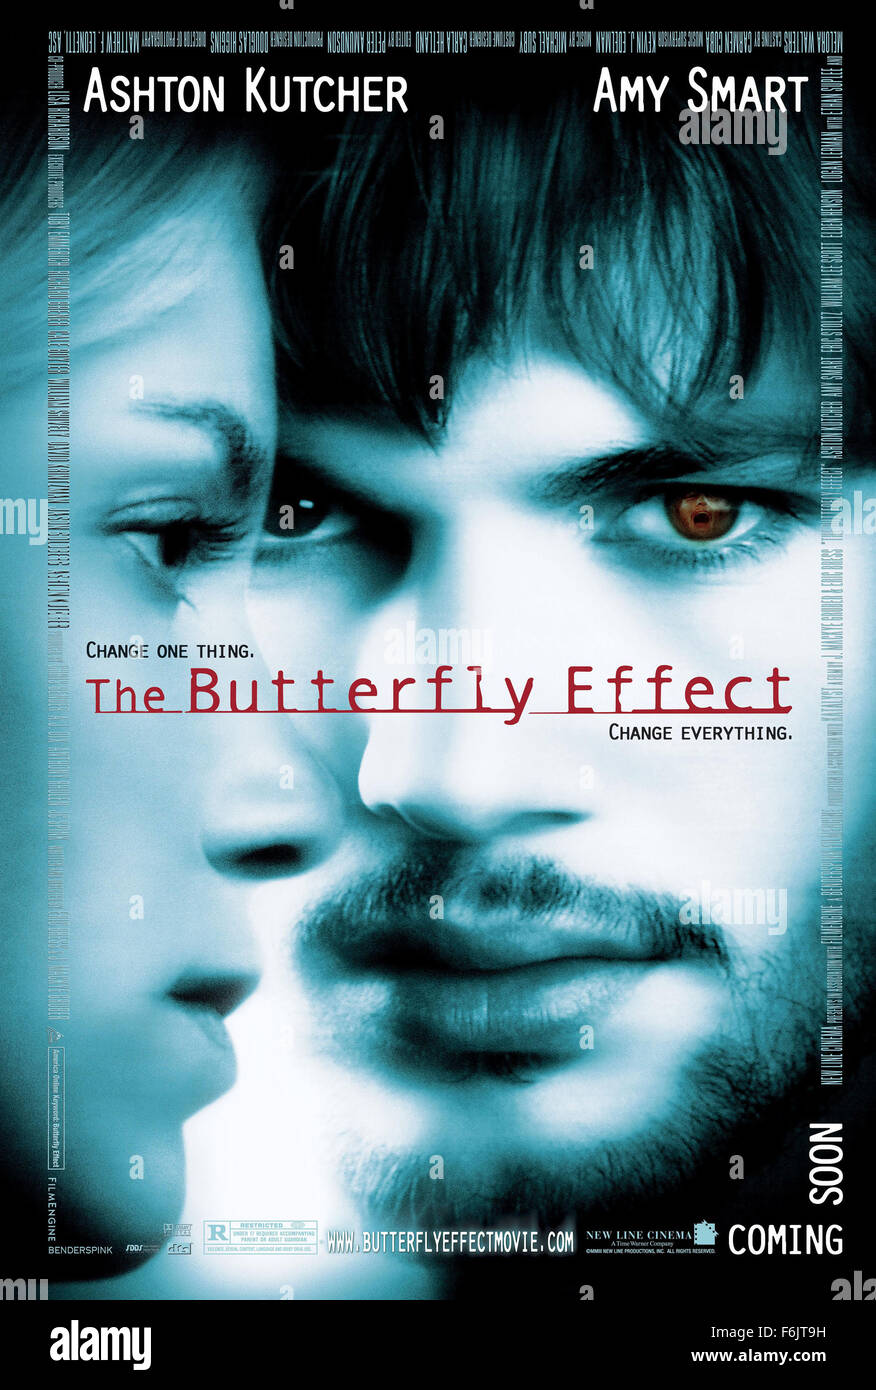 Dec 03, 2004; Hollywood, CA, USA; Actor ASHTON KUTCHER stars as Evan Treborn and AMY SMART stars as Kayleigh Miller in the sci-fi thriller, 'The Butterfly Effect', directed by Eric Bress and J. Mackye Gruber. Stock Photo